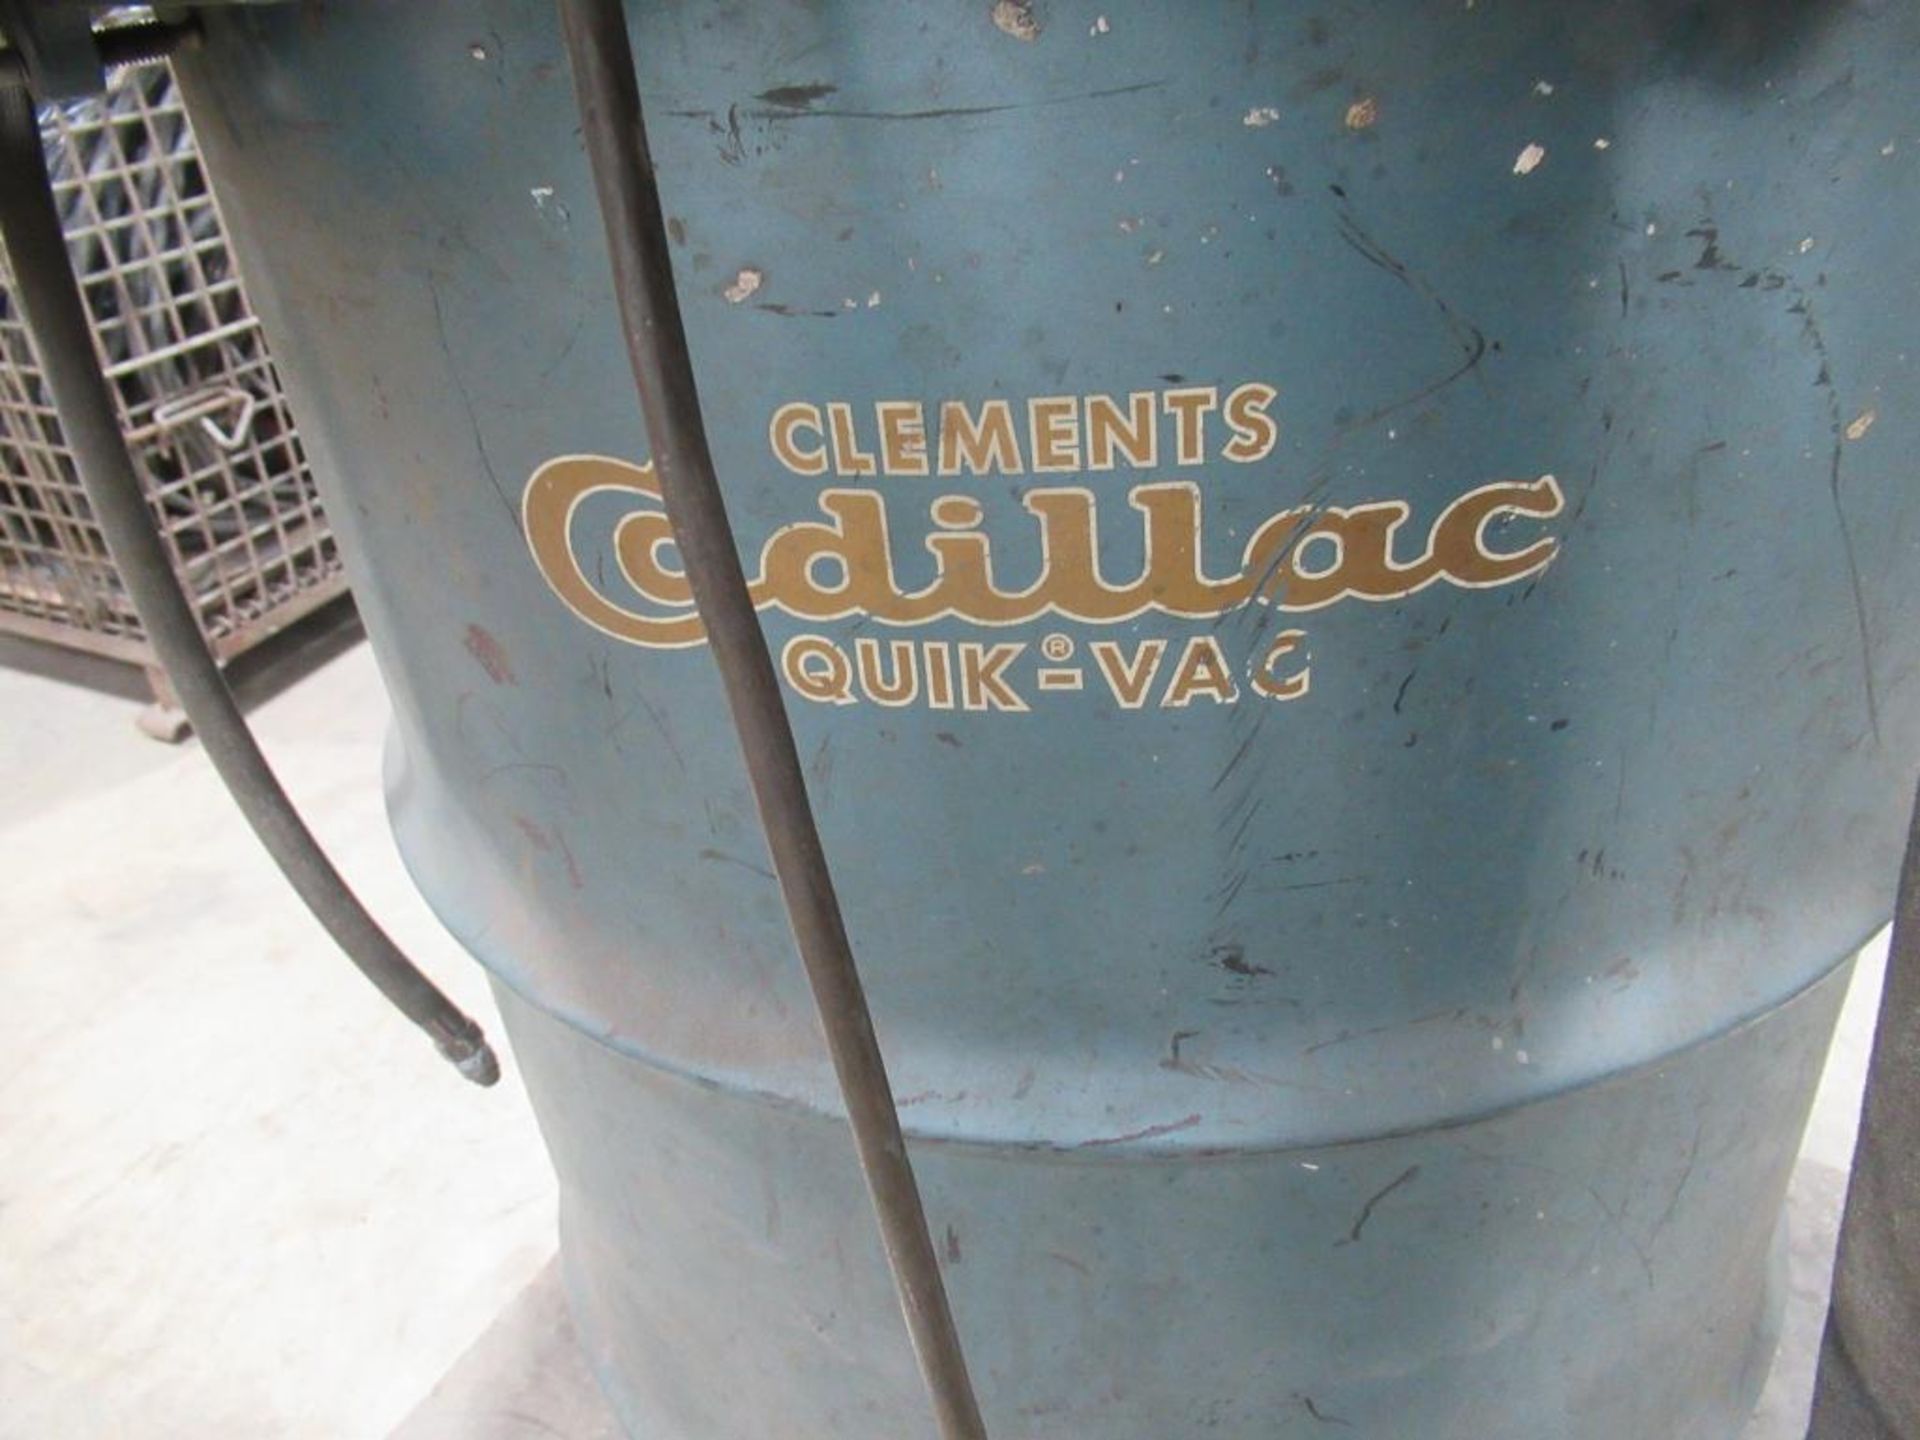 Clements 55-Gallon Industrial Vacuum - Image 2 of 2